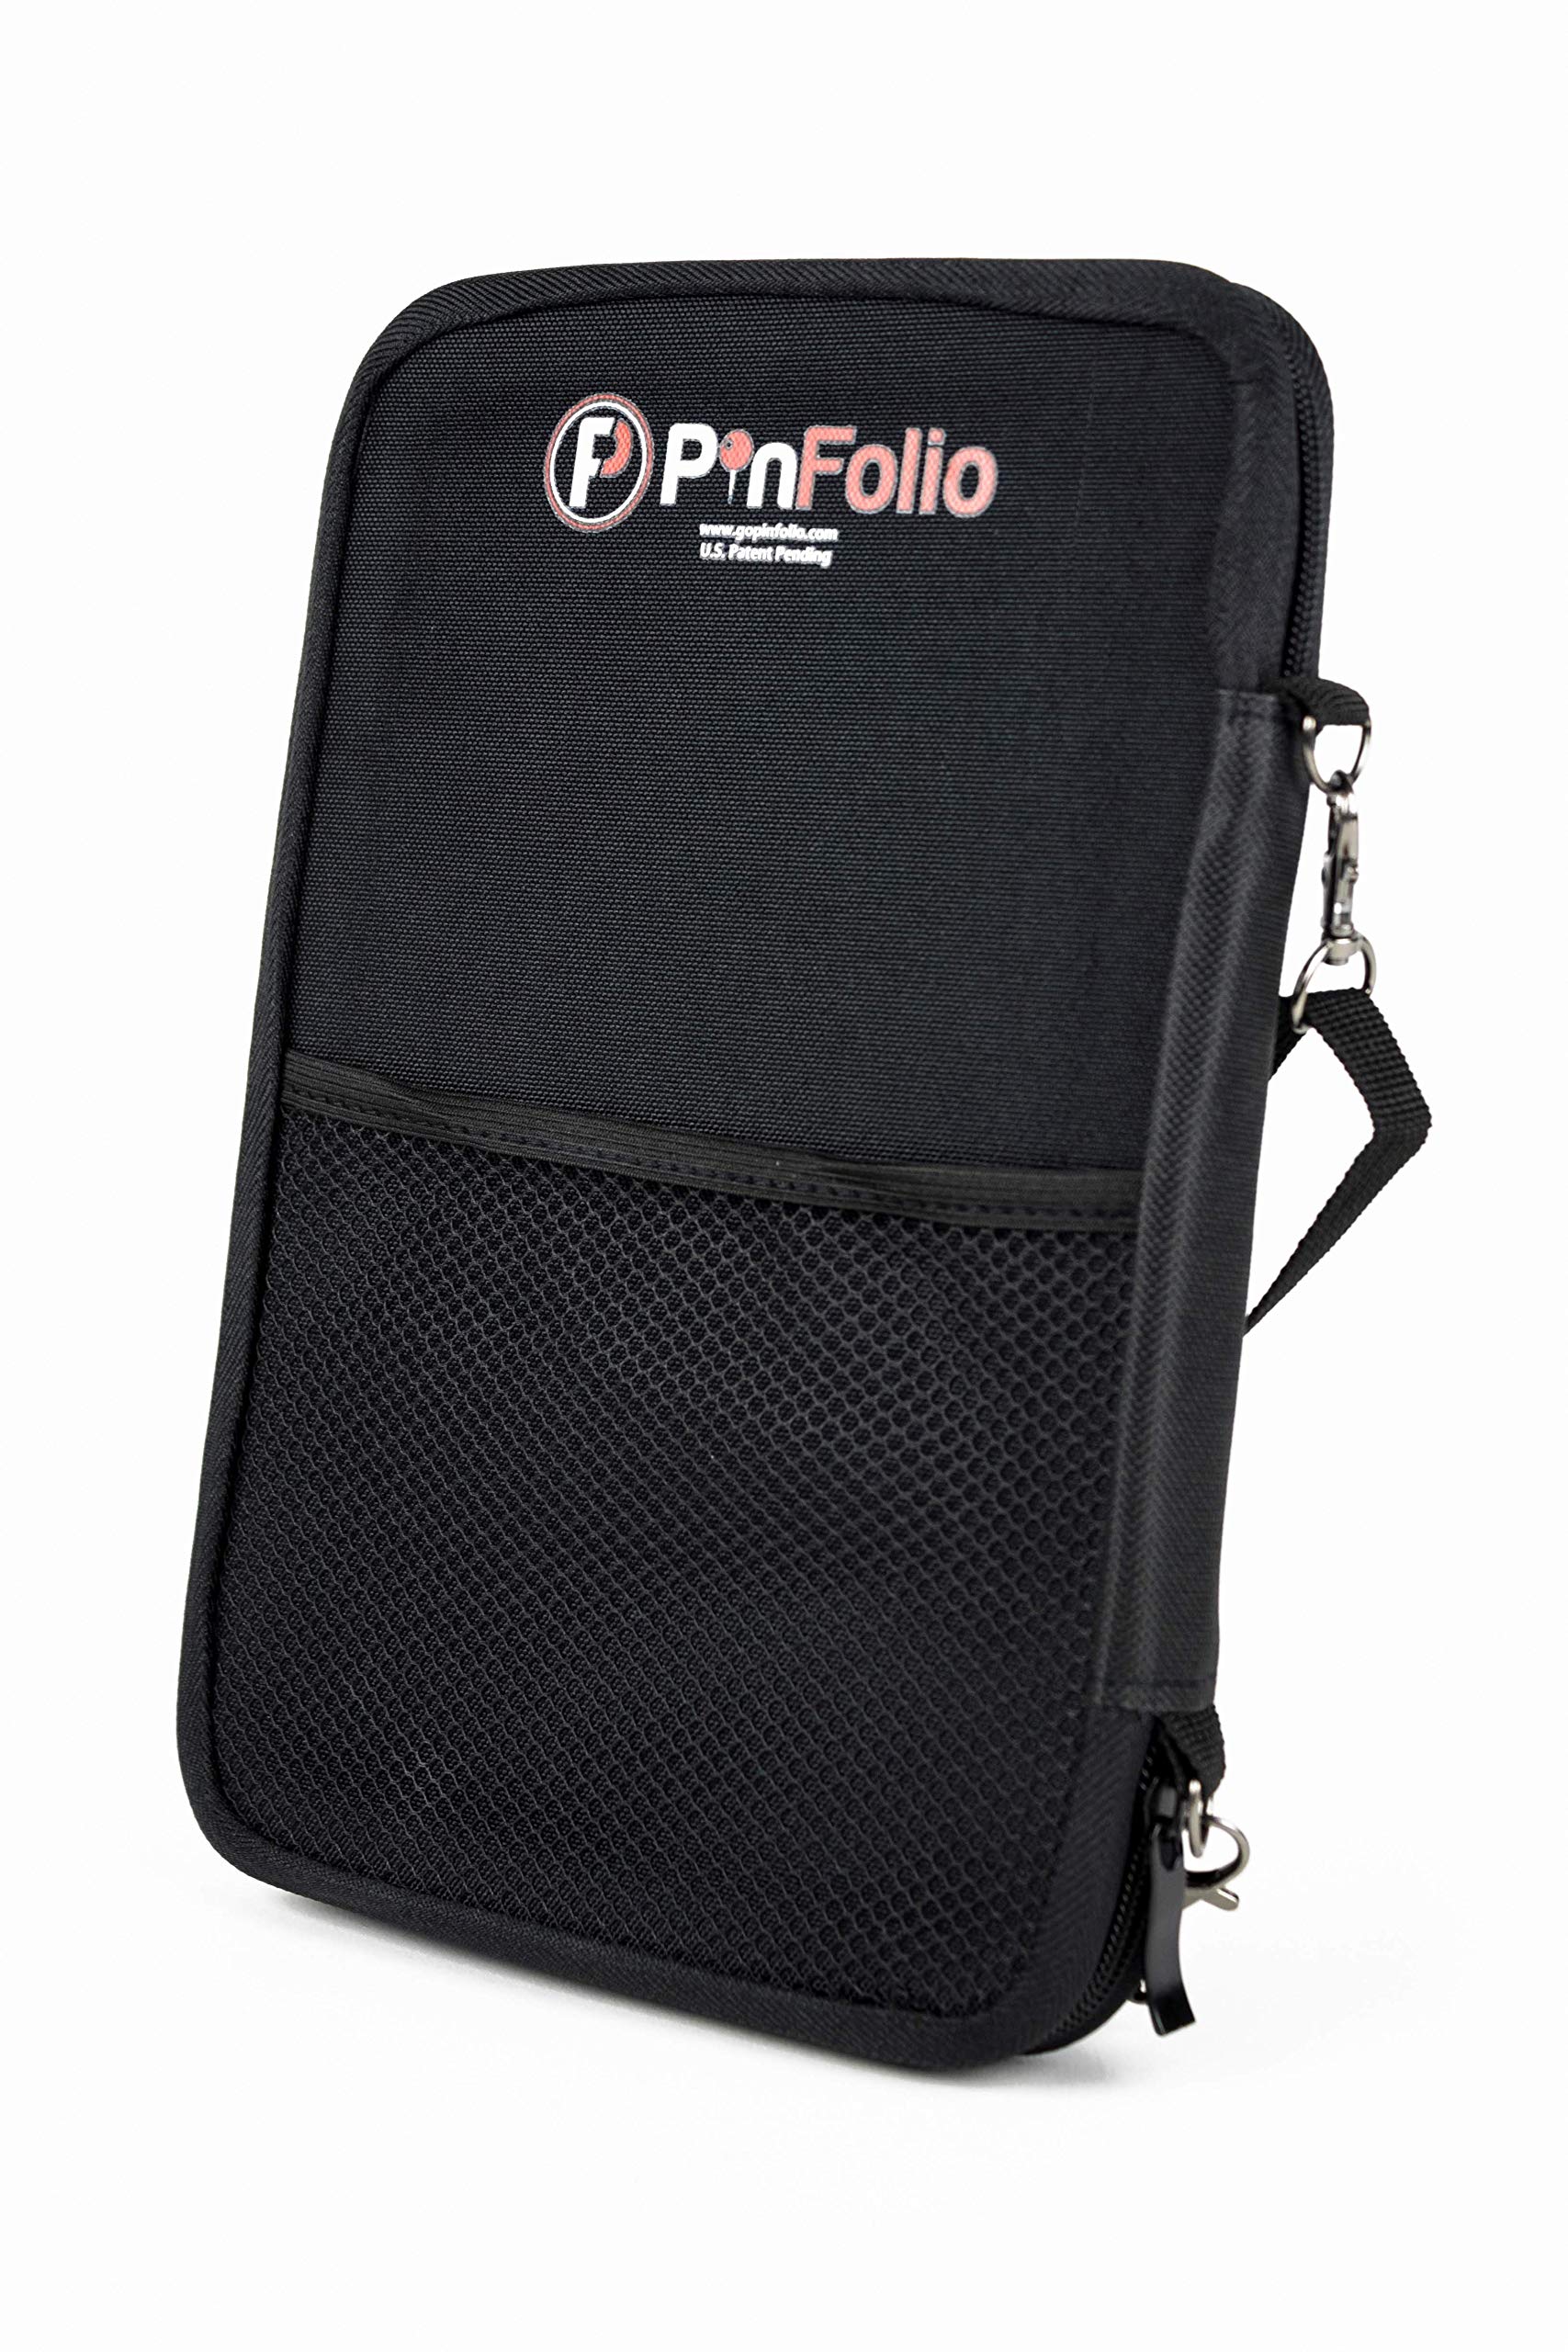 PinFolio Classic Pin Display Bag, Lightweight Sports & Disney Pin Book  Designed for Storage & Easy Trading Up to 100 1-Inch Enam